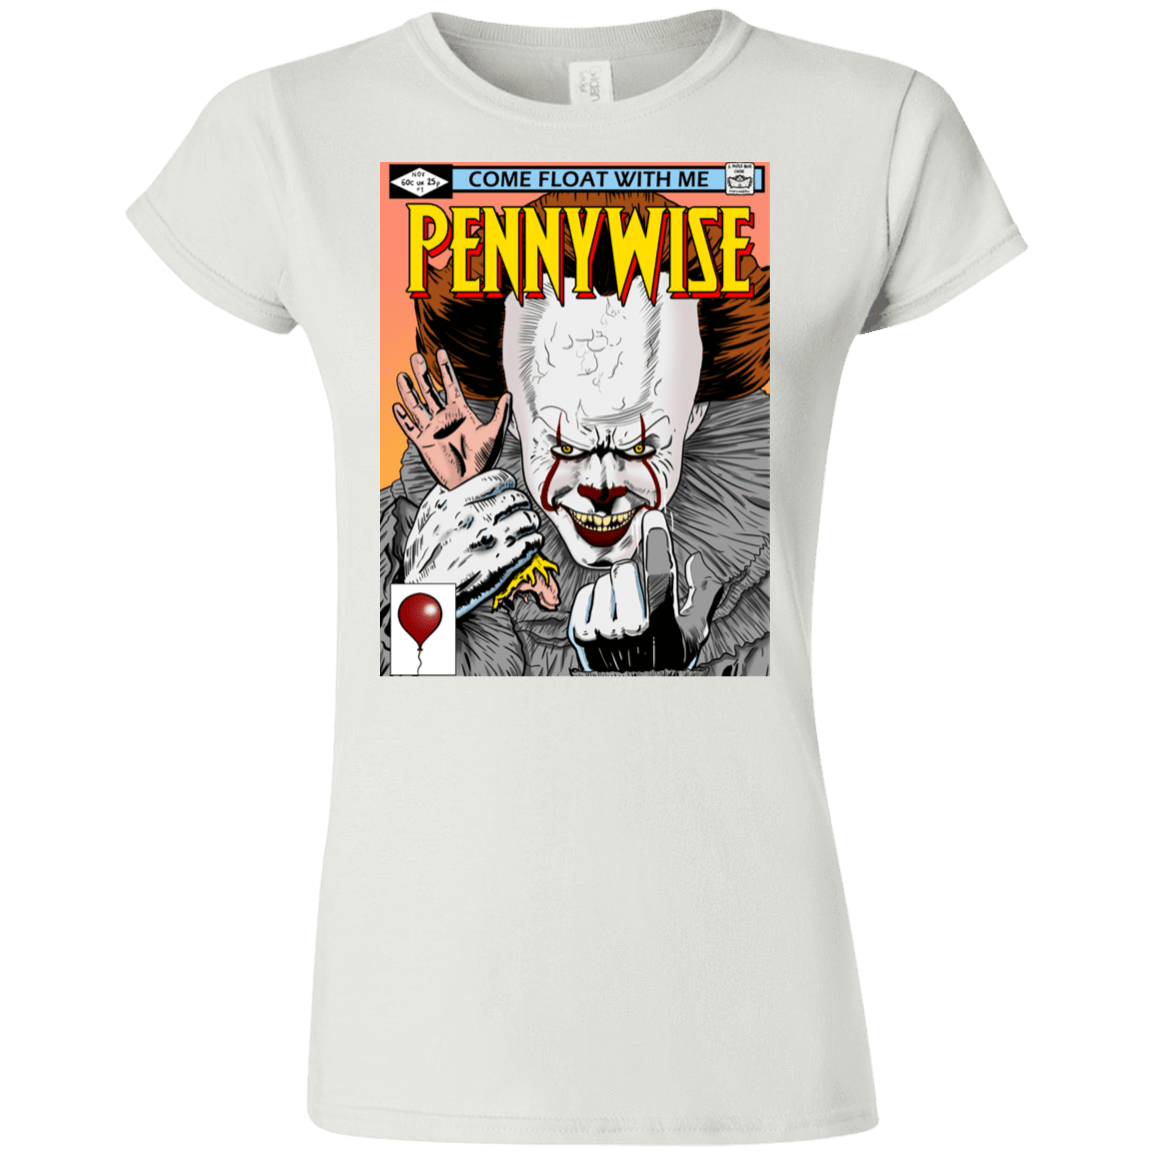 T-Shirts White / S Pennywise 8+ Junior Slimmer-Fit T-Shirt